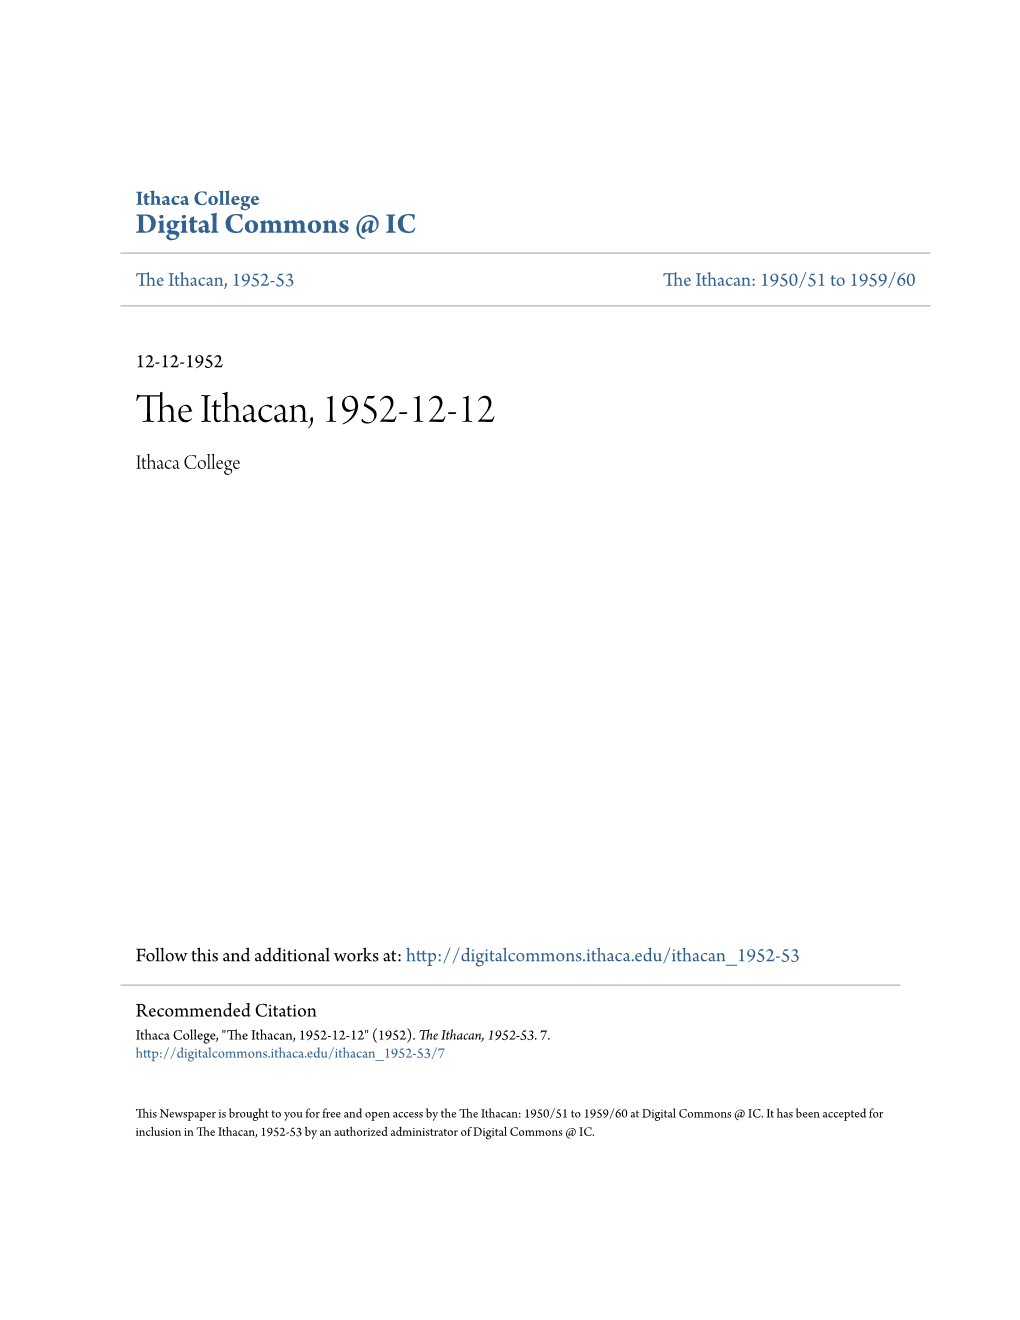 The Ithacan, 1952-12-12